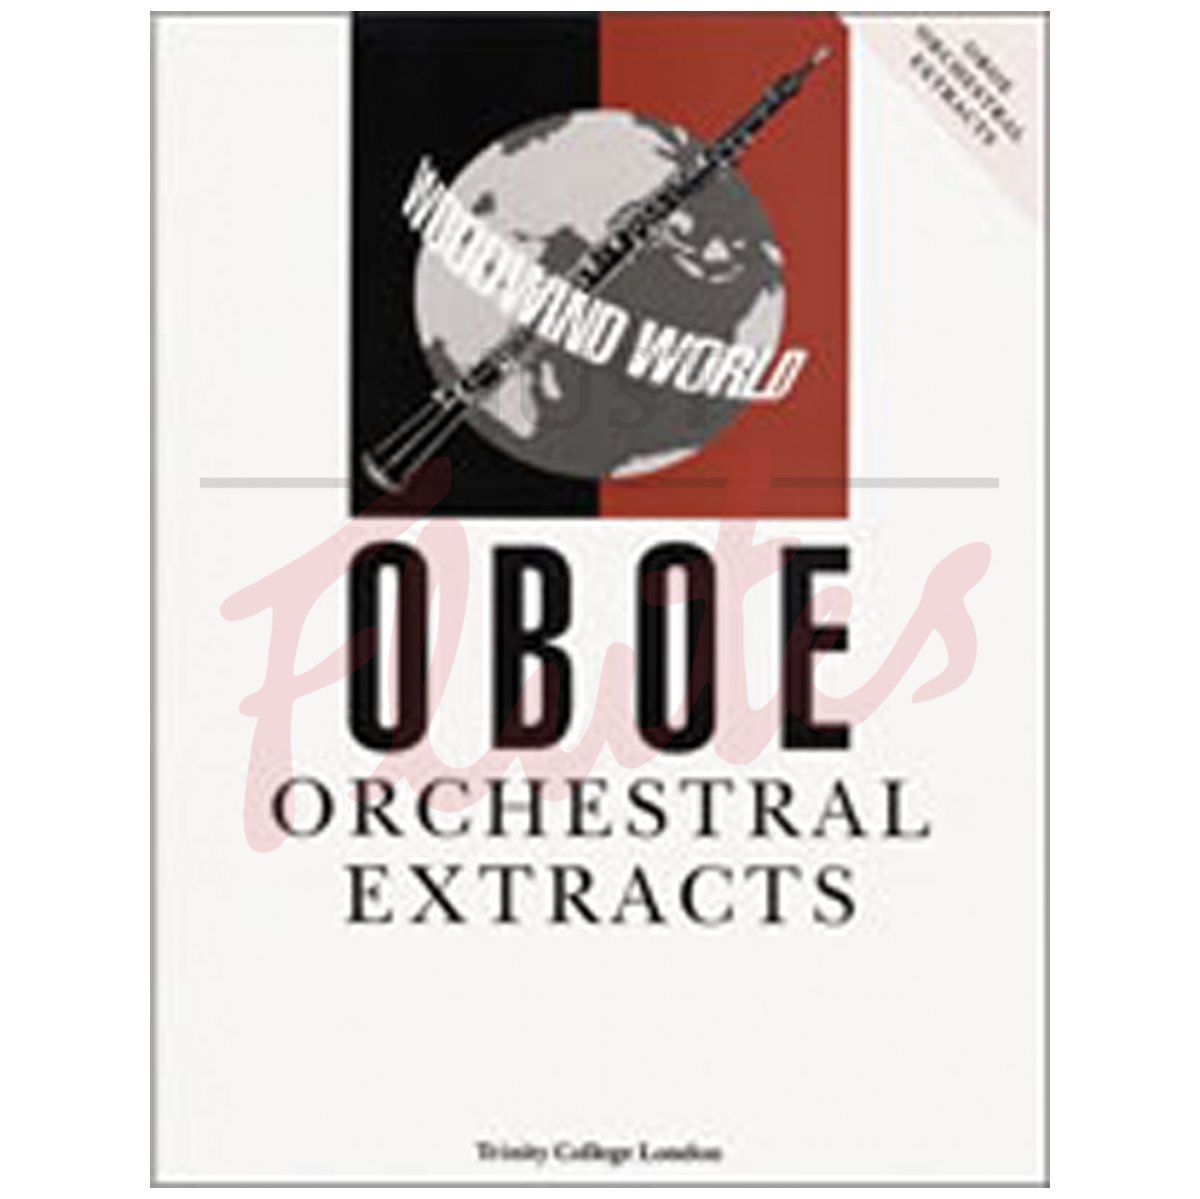 Woodwind World Orchestral Extracts for Oboe